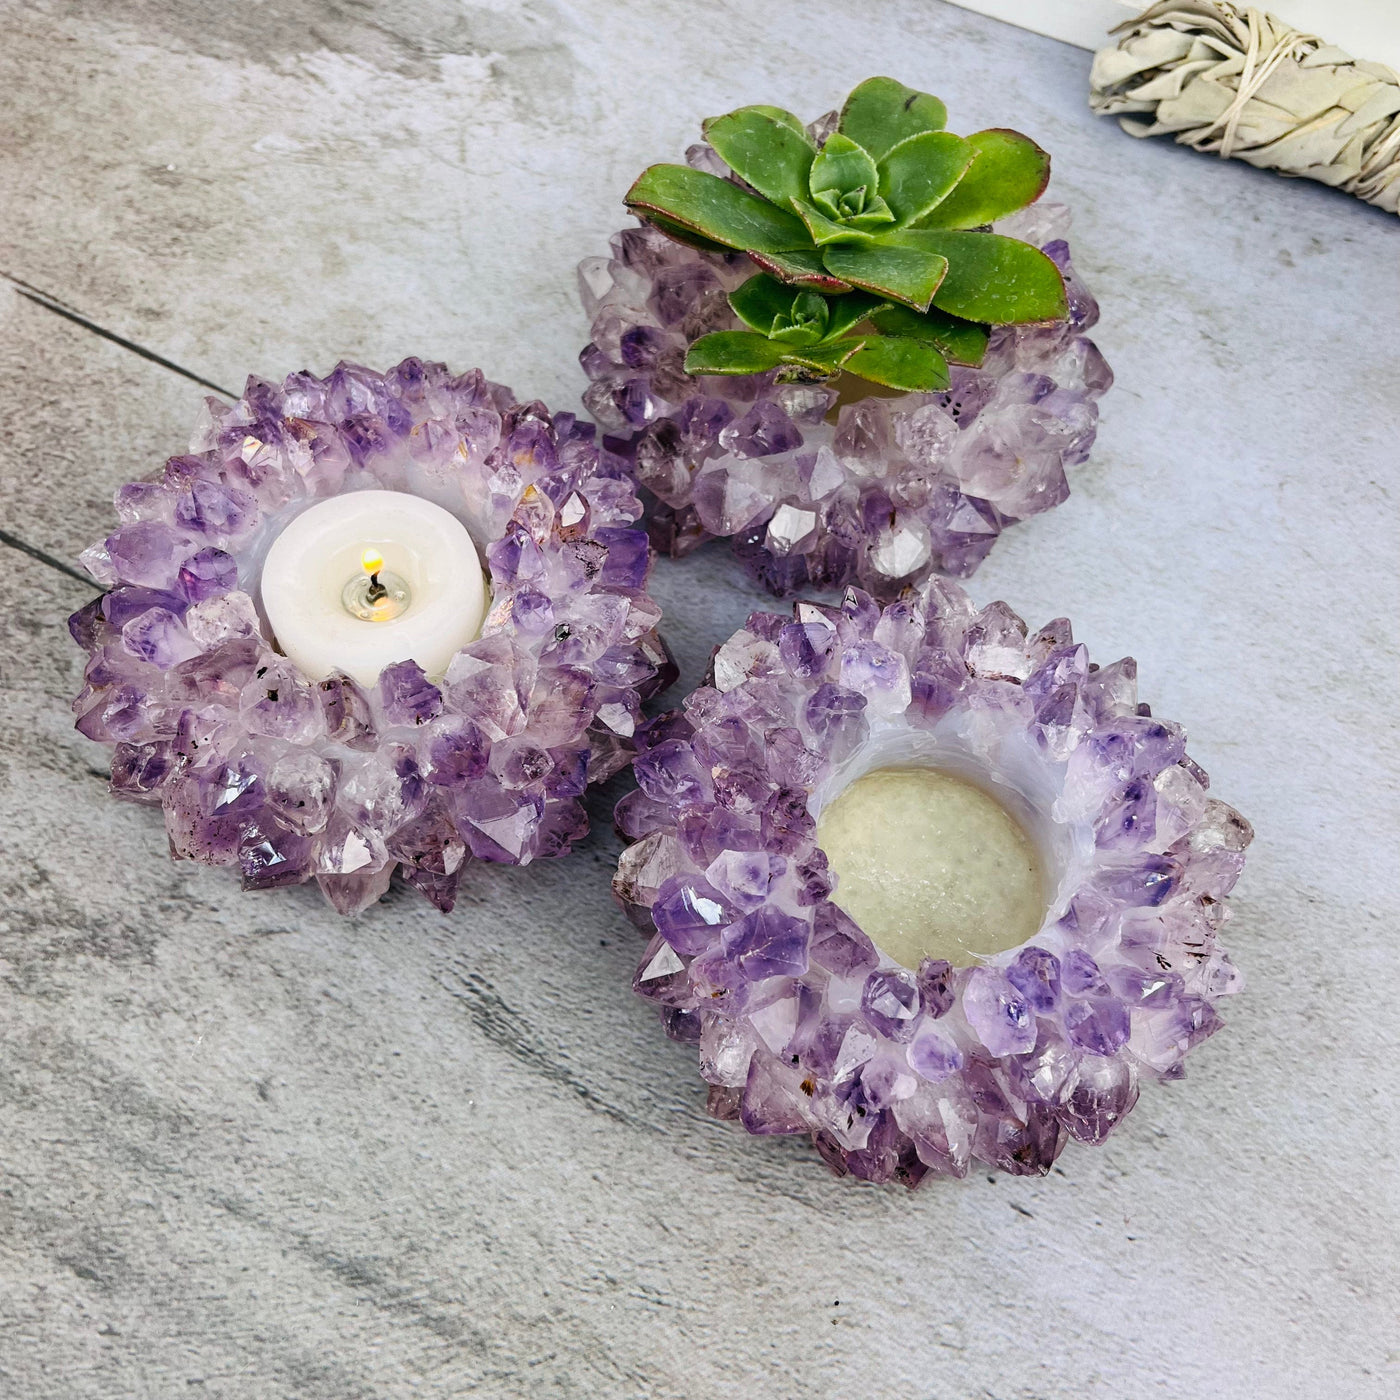 3 Amethyst Point Candle Holders, one with a candle  and one with a plant